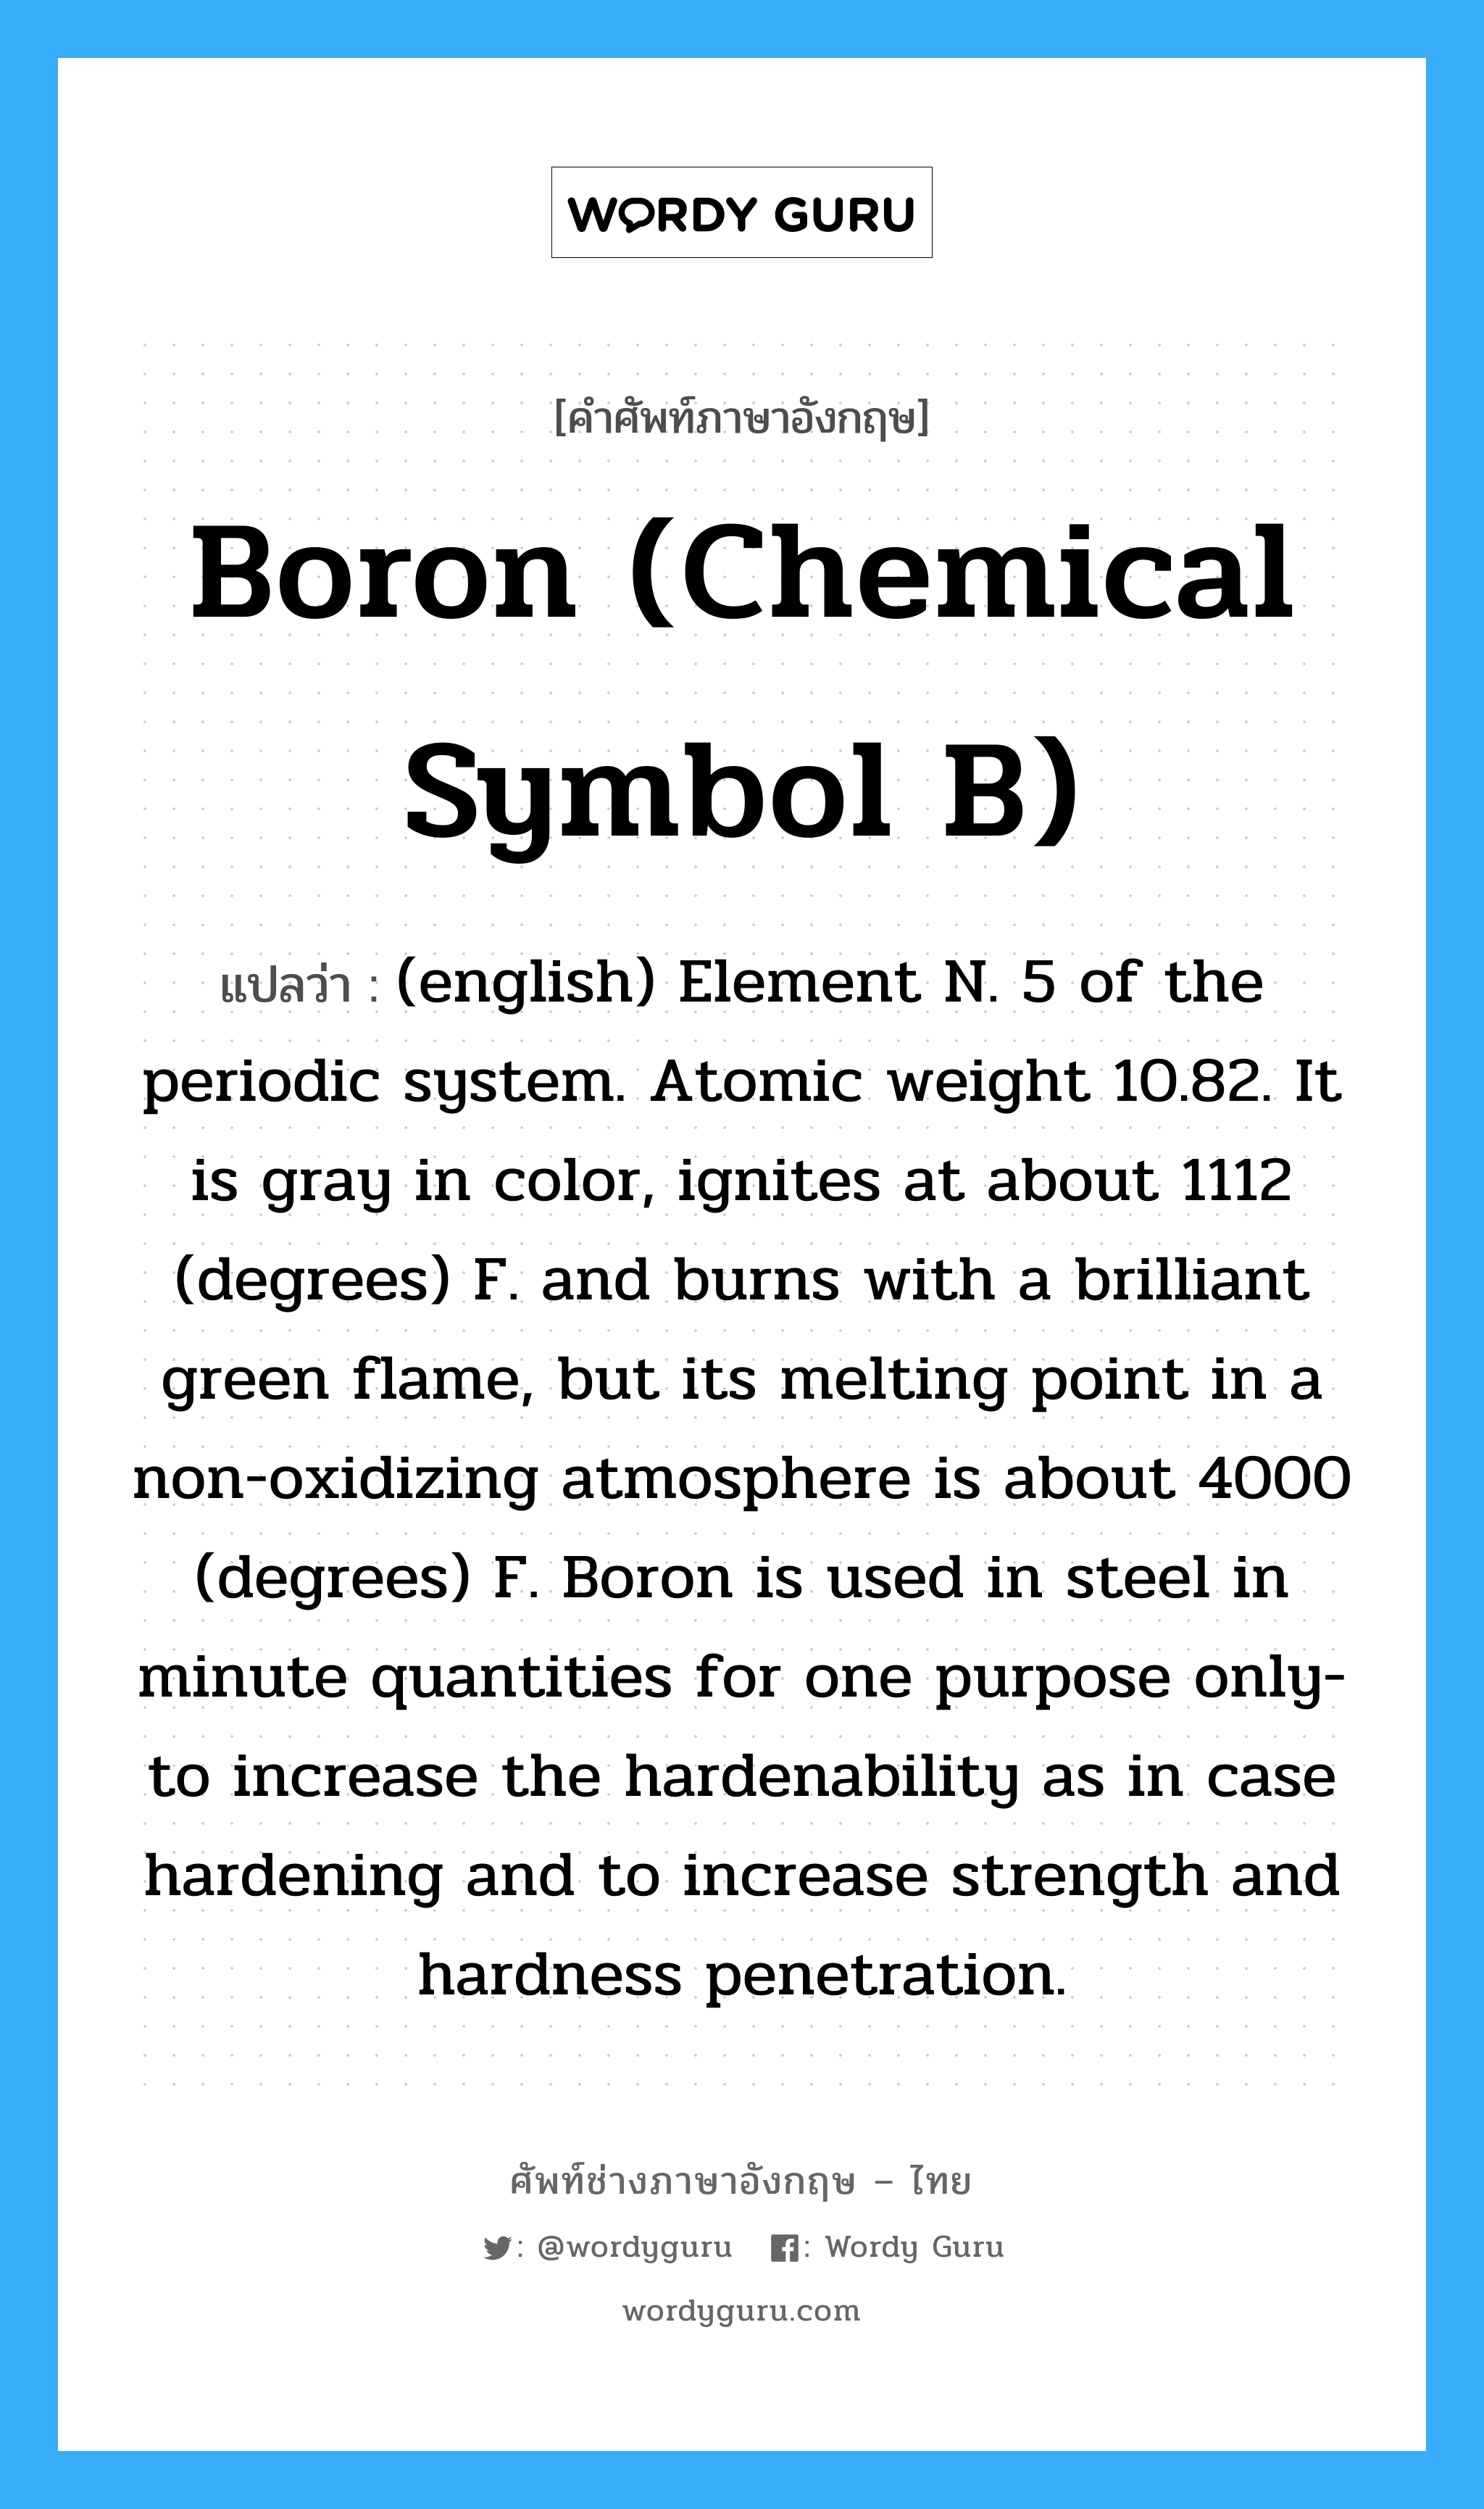 (english) Element N. 5 of the periodic system. Atomic weight 10.82. It is gray in color, ignites at about 1112 (degrees) F. and burns with a brilliant green flame, but its melting point in a non-oxidizing atmosphere is about 4000 (degrees) F. Boron is used in steel in minute quantities for one purpose only- to increase the hardenability as in case hardening and to increase strength and hardness penetration. ภาษาอังกฤษ?, คำศัพท์ช่างภาษาอังกฤษ - ไทย (english) Element N. 5 of the periodic system. Atomic weight 10.82. It is gray in color, ignites at about 1112 (degrees) F. and burns with a brilliant green flame, but its melting point in a non-oxidizing atmosphere is about 4000 (degrees) F. Boron is used in steel in minute quantities for one purpose only- to increase the hardenability as in case hardening and to increase strength and hardness penetration. คำศัพท์ภาษาอังกฤษ (english) Element N. 5 of the periodic system. Atomic weight 10.82. It is gray in color, ignites at about 1112 (degrees) F. and burns with a brilliant green flame, but its melting point in a non-oxidizing atmosphere is about 4000 (degrees) F. Boron is used in steel in minute quantities for one purpose only- to increase the hardenability as in case hardening and to increase strength and hardness penetration. แปลว่า Boron (chemical symbol B)